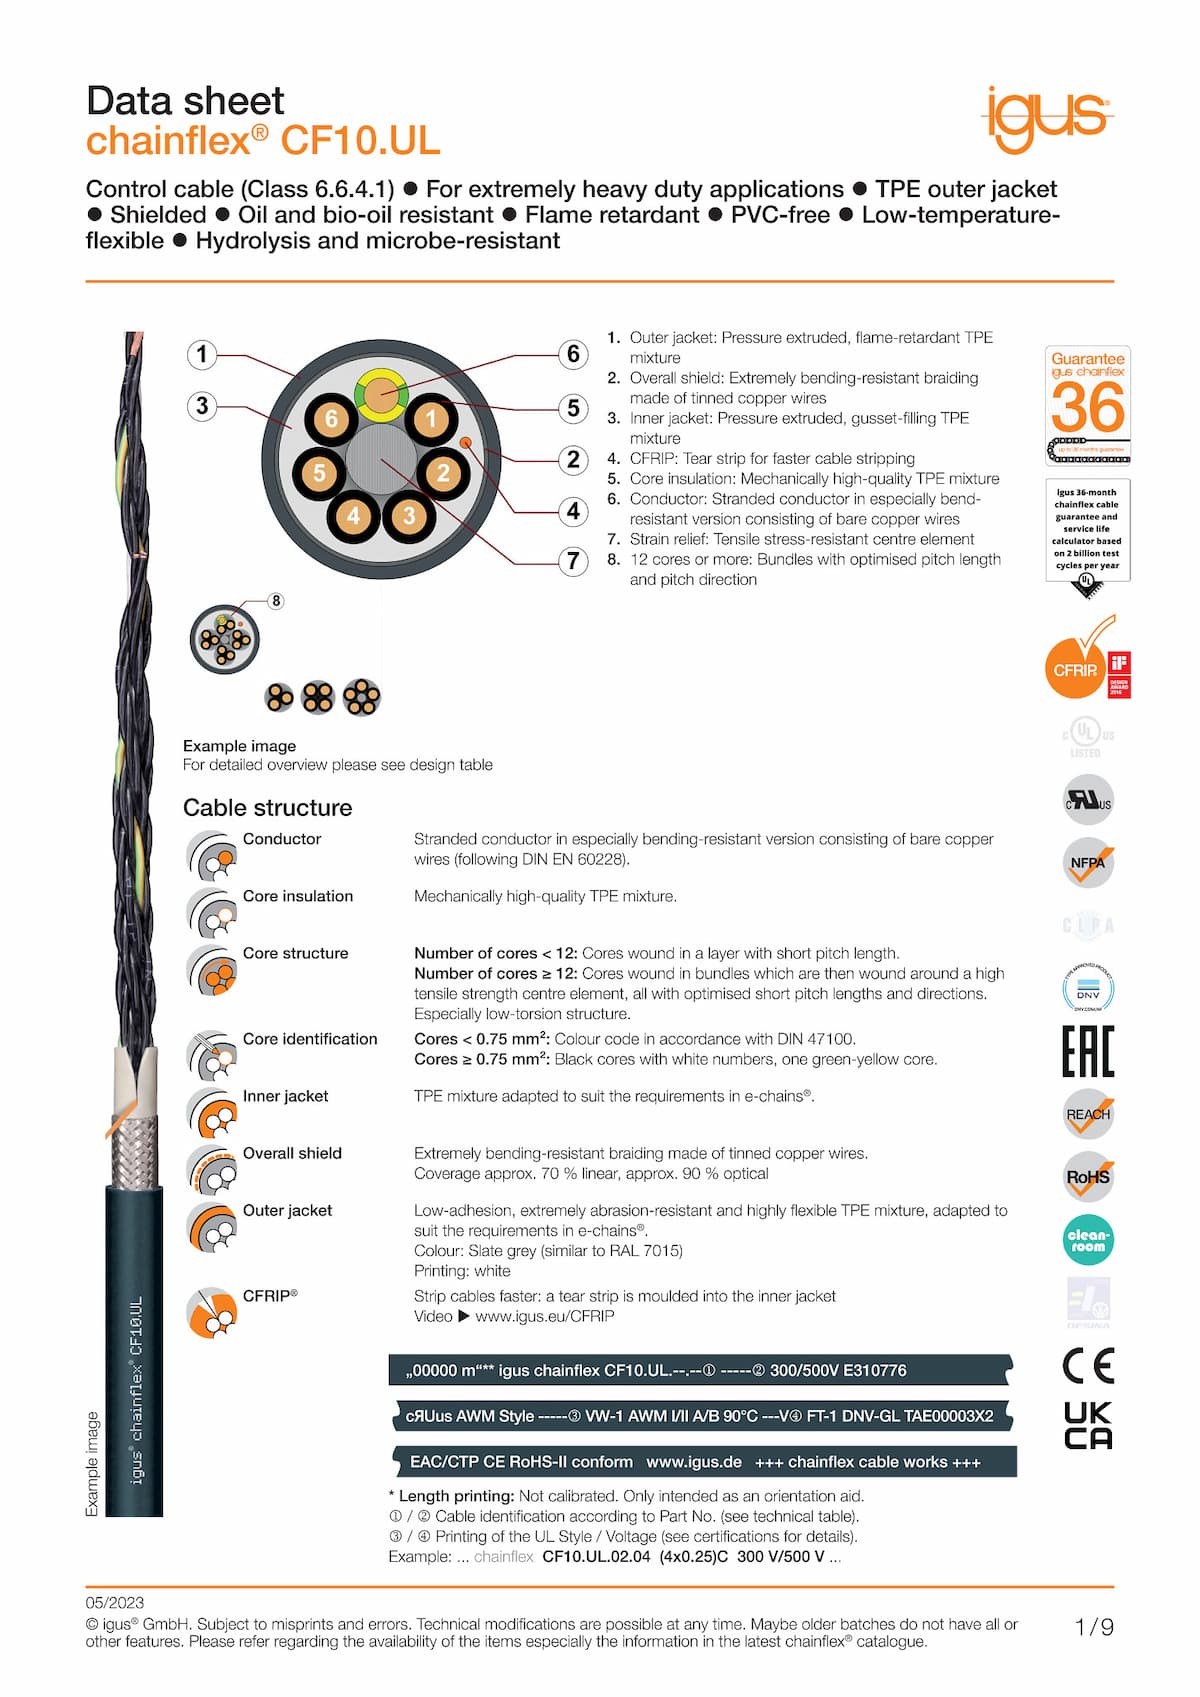 Technical data sheet chainflex® control cable CF10.UL